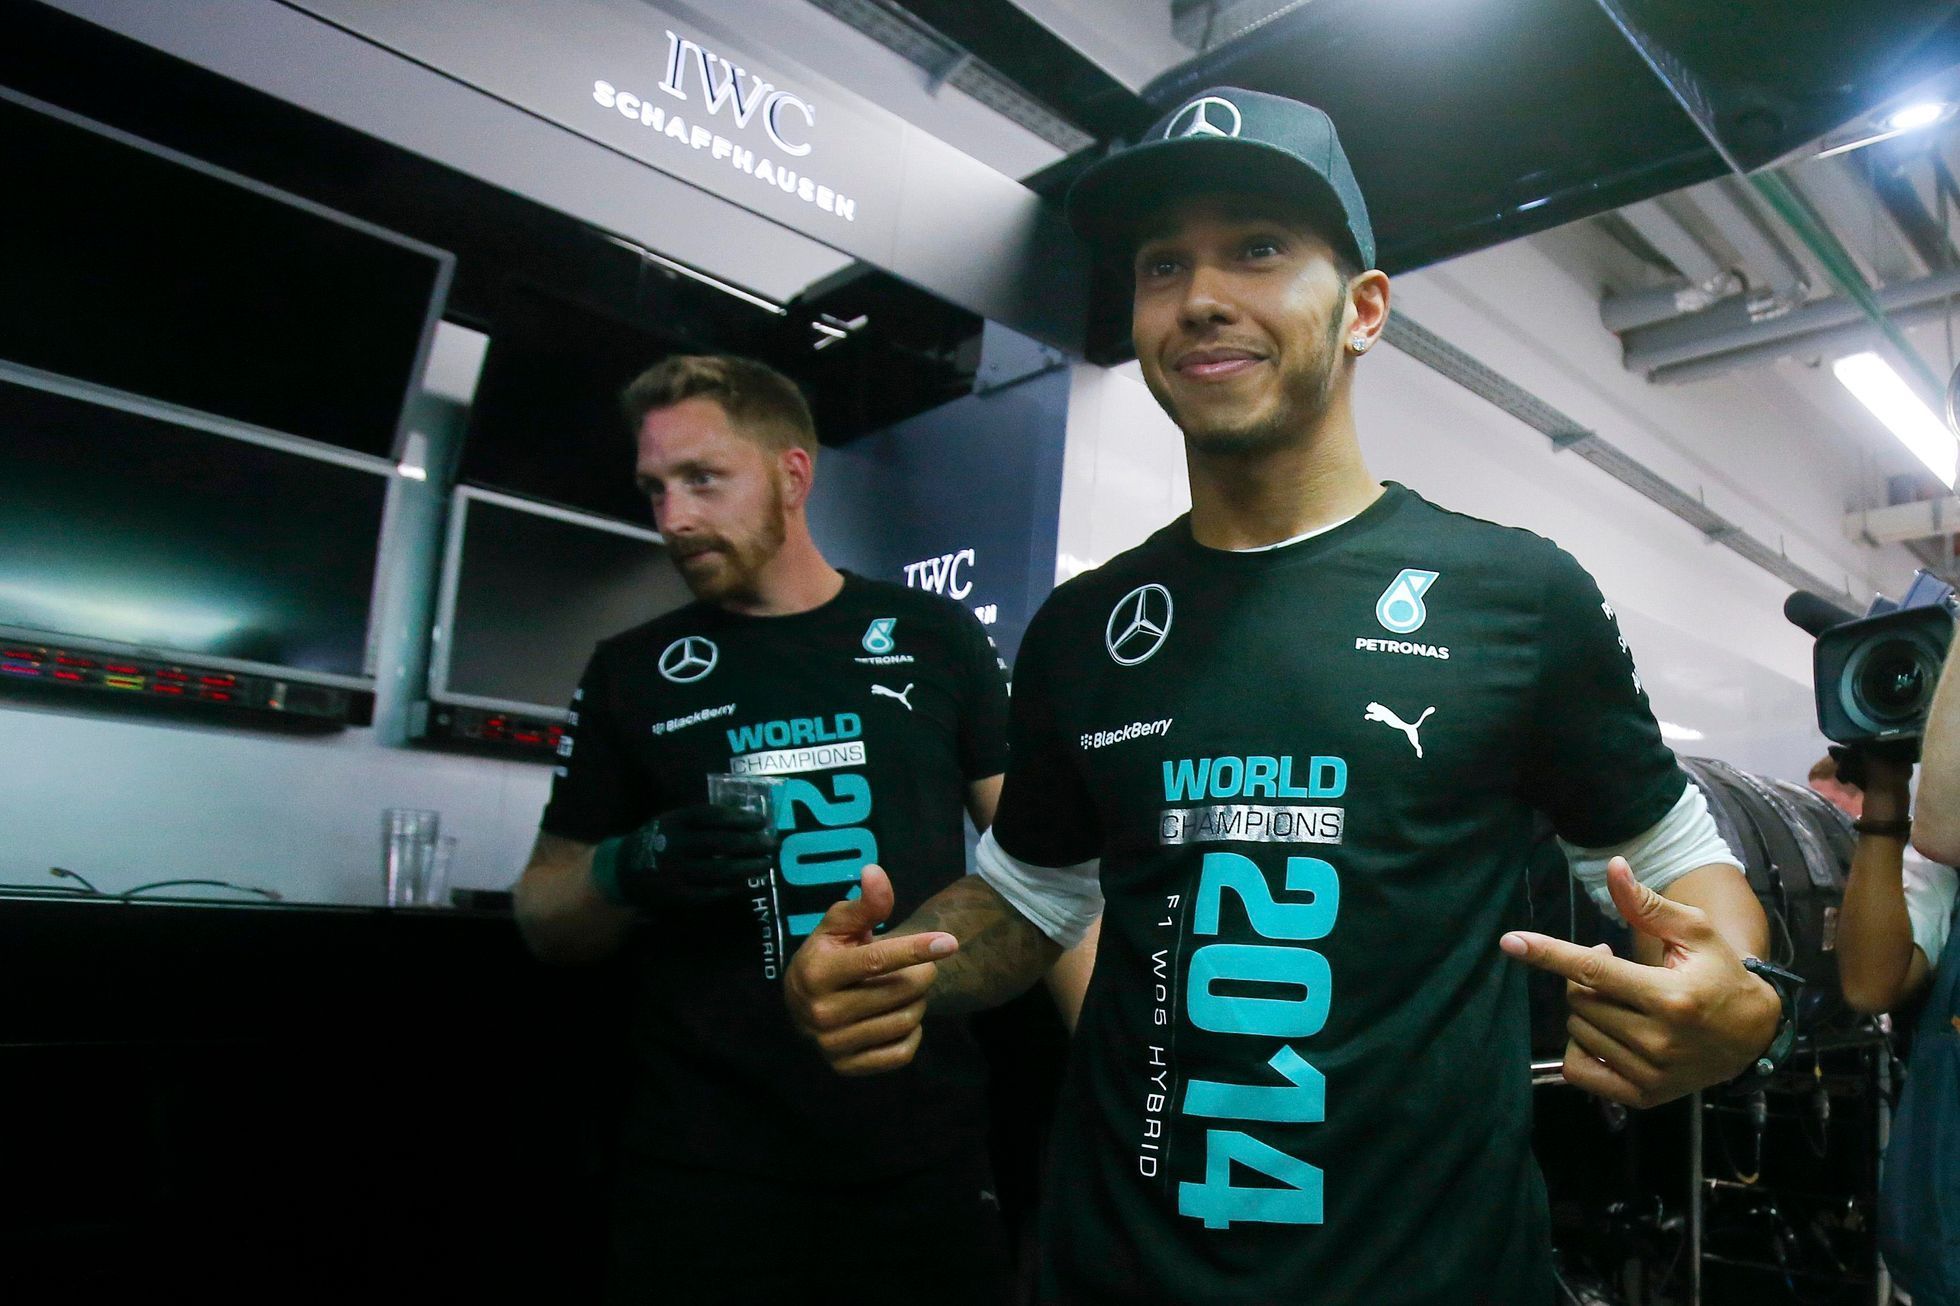 Mercedes Formula One driver Hamilton of Britain gestures after the first Russian Grand Prix in Sochi